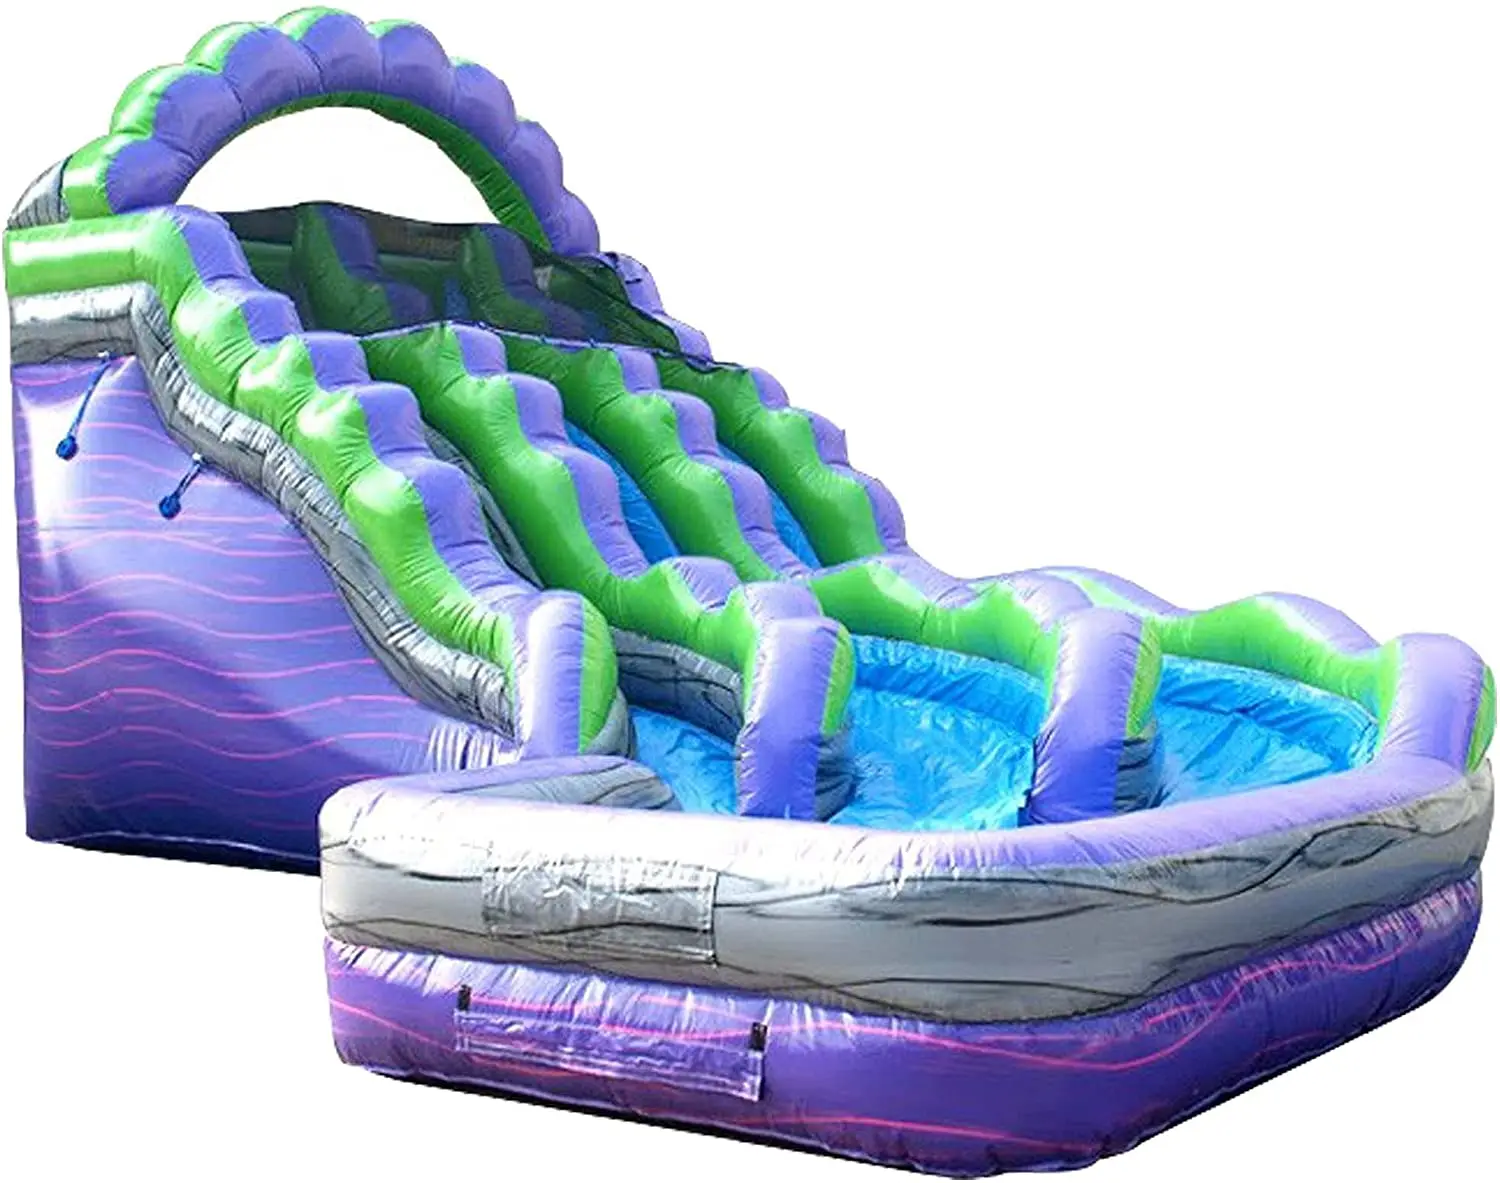 

commercial Popular purple inflatable Curve water slide outdoor kids double lane water slide with pool, Customized